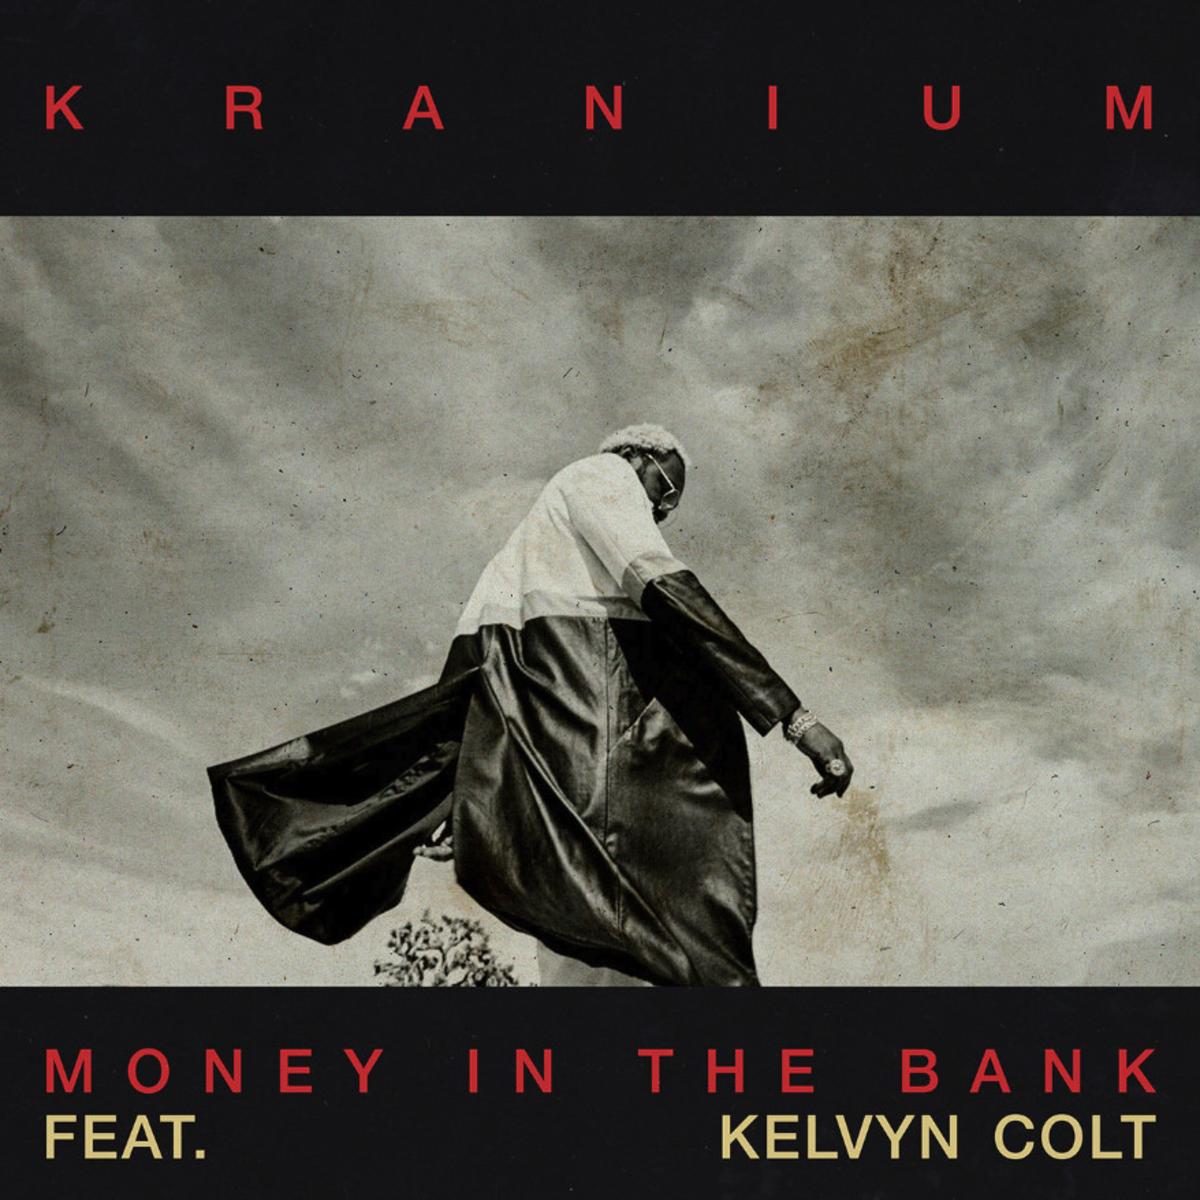 Kranium joins forces with Kelvyn Colt for new single "Money In The Bank"